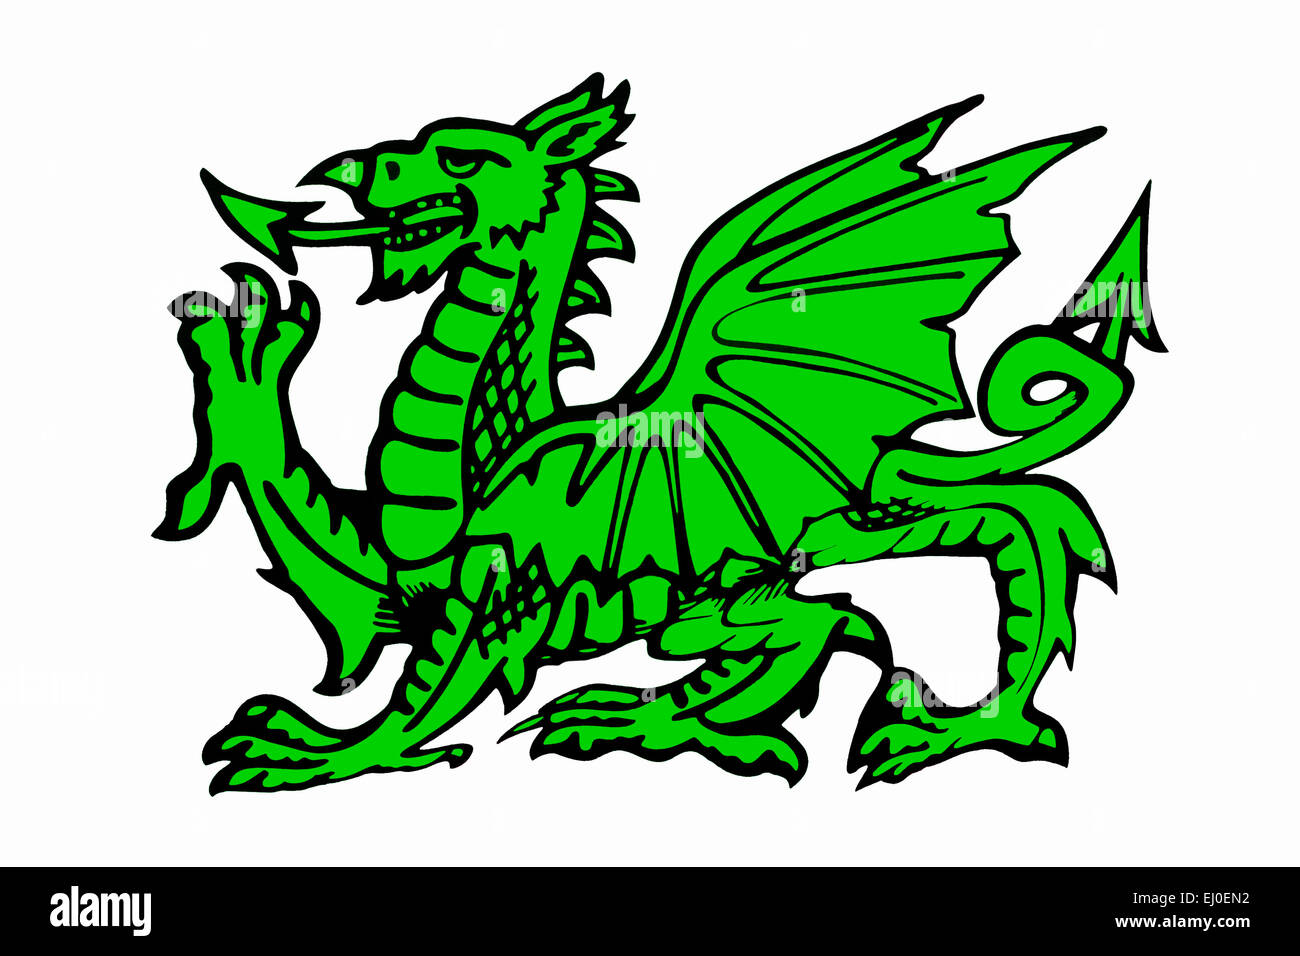 The green dragon of Wales Stock Photo